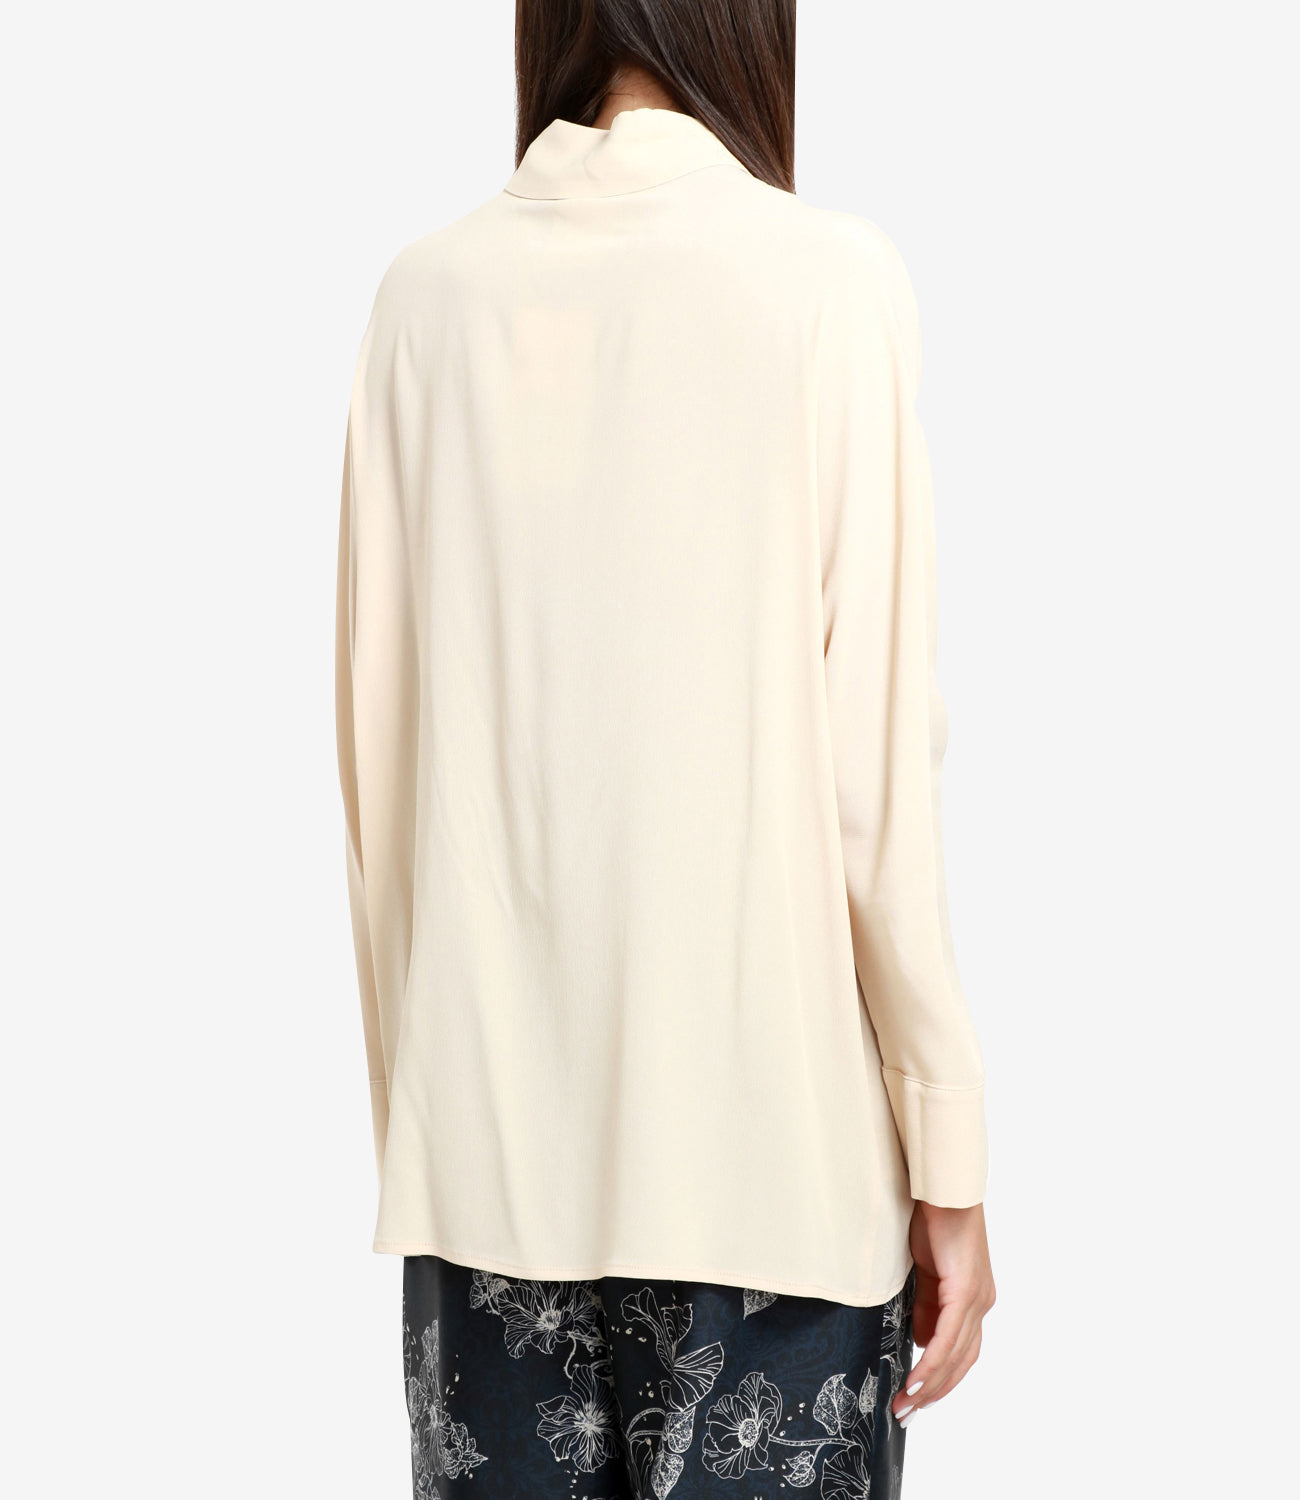 Semicouture | Tiffany Parchment Shirt